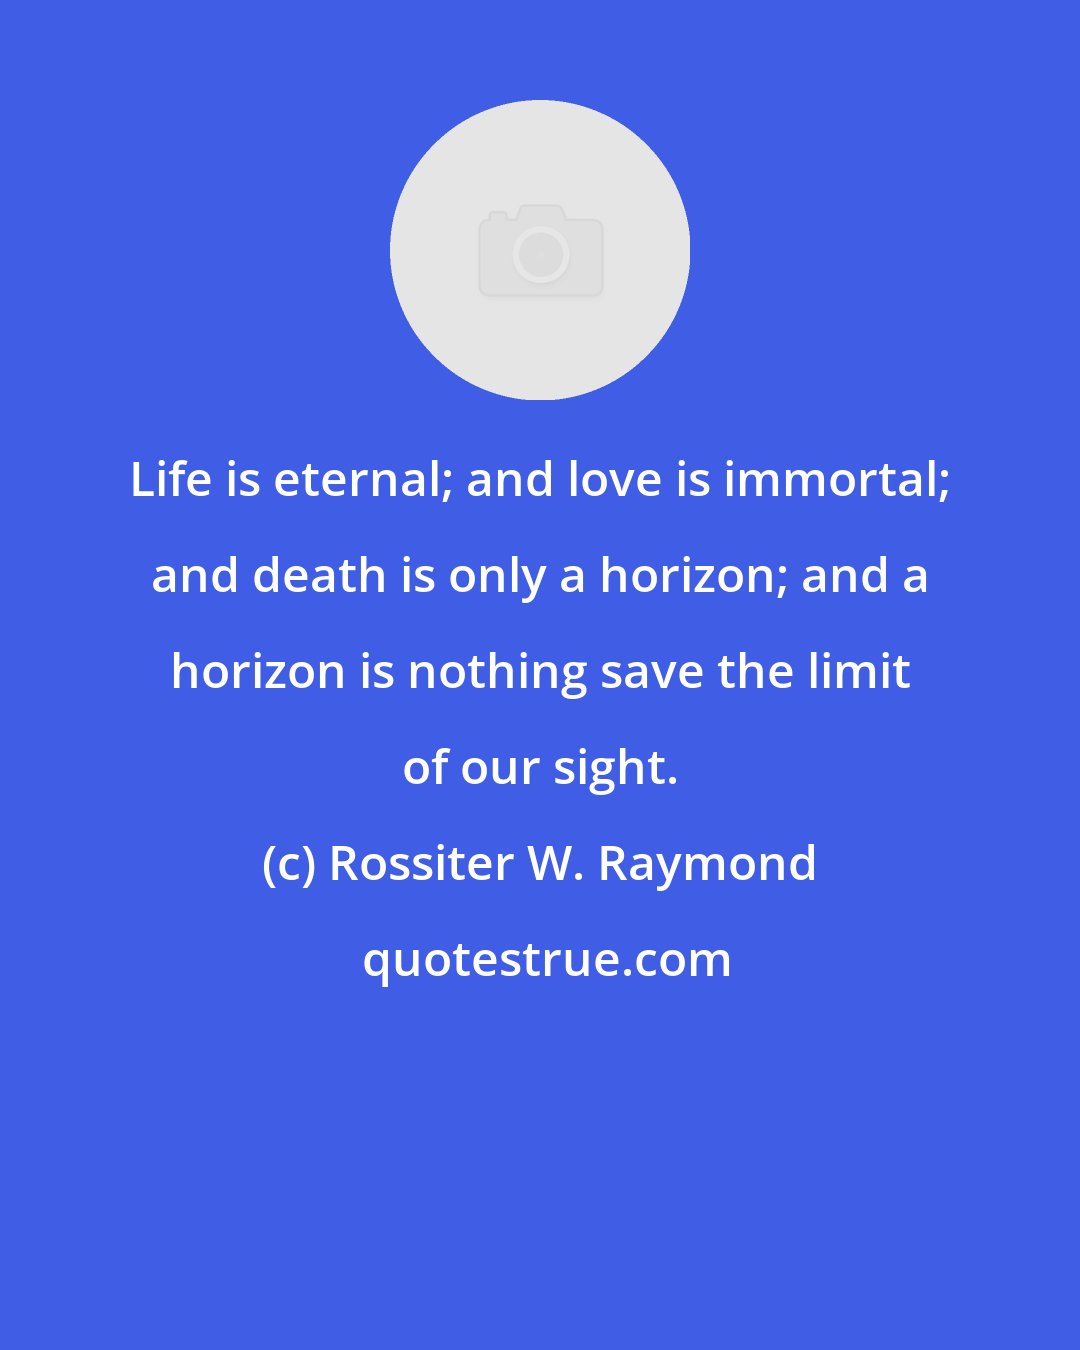 Rossiter W. Raymond: Life is eternal; and love is immortal; and death is only a horizon; and a horizon is nothing save the limit of our sight.